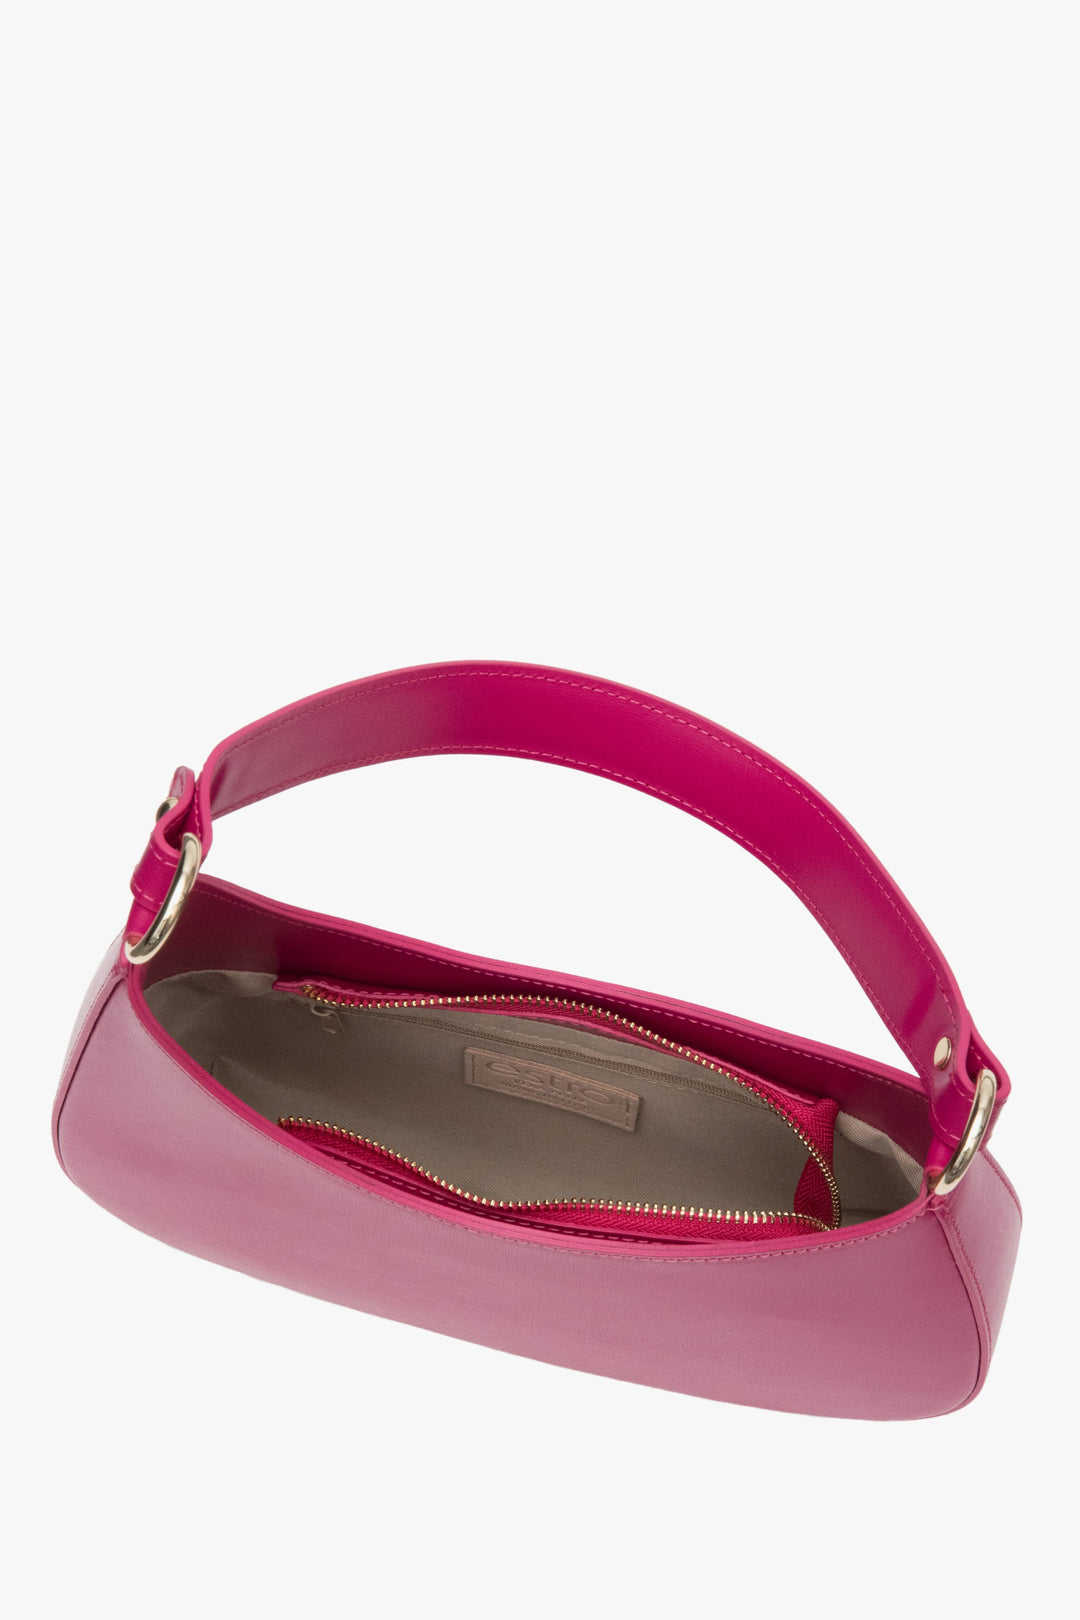 Women's shoulder bag in pink in Italian natural leather - close-up of the interior of the model.